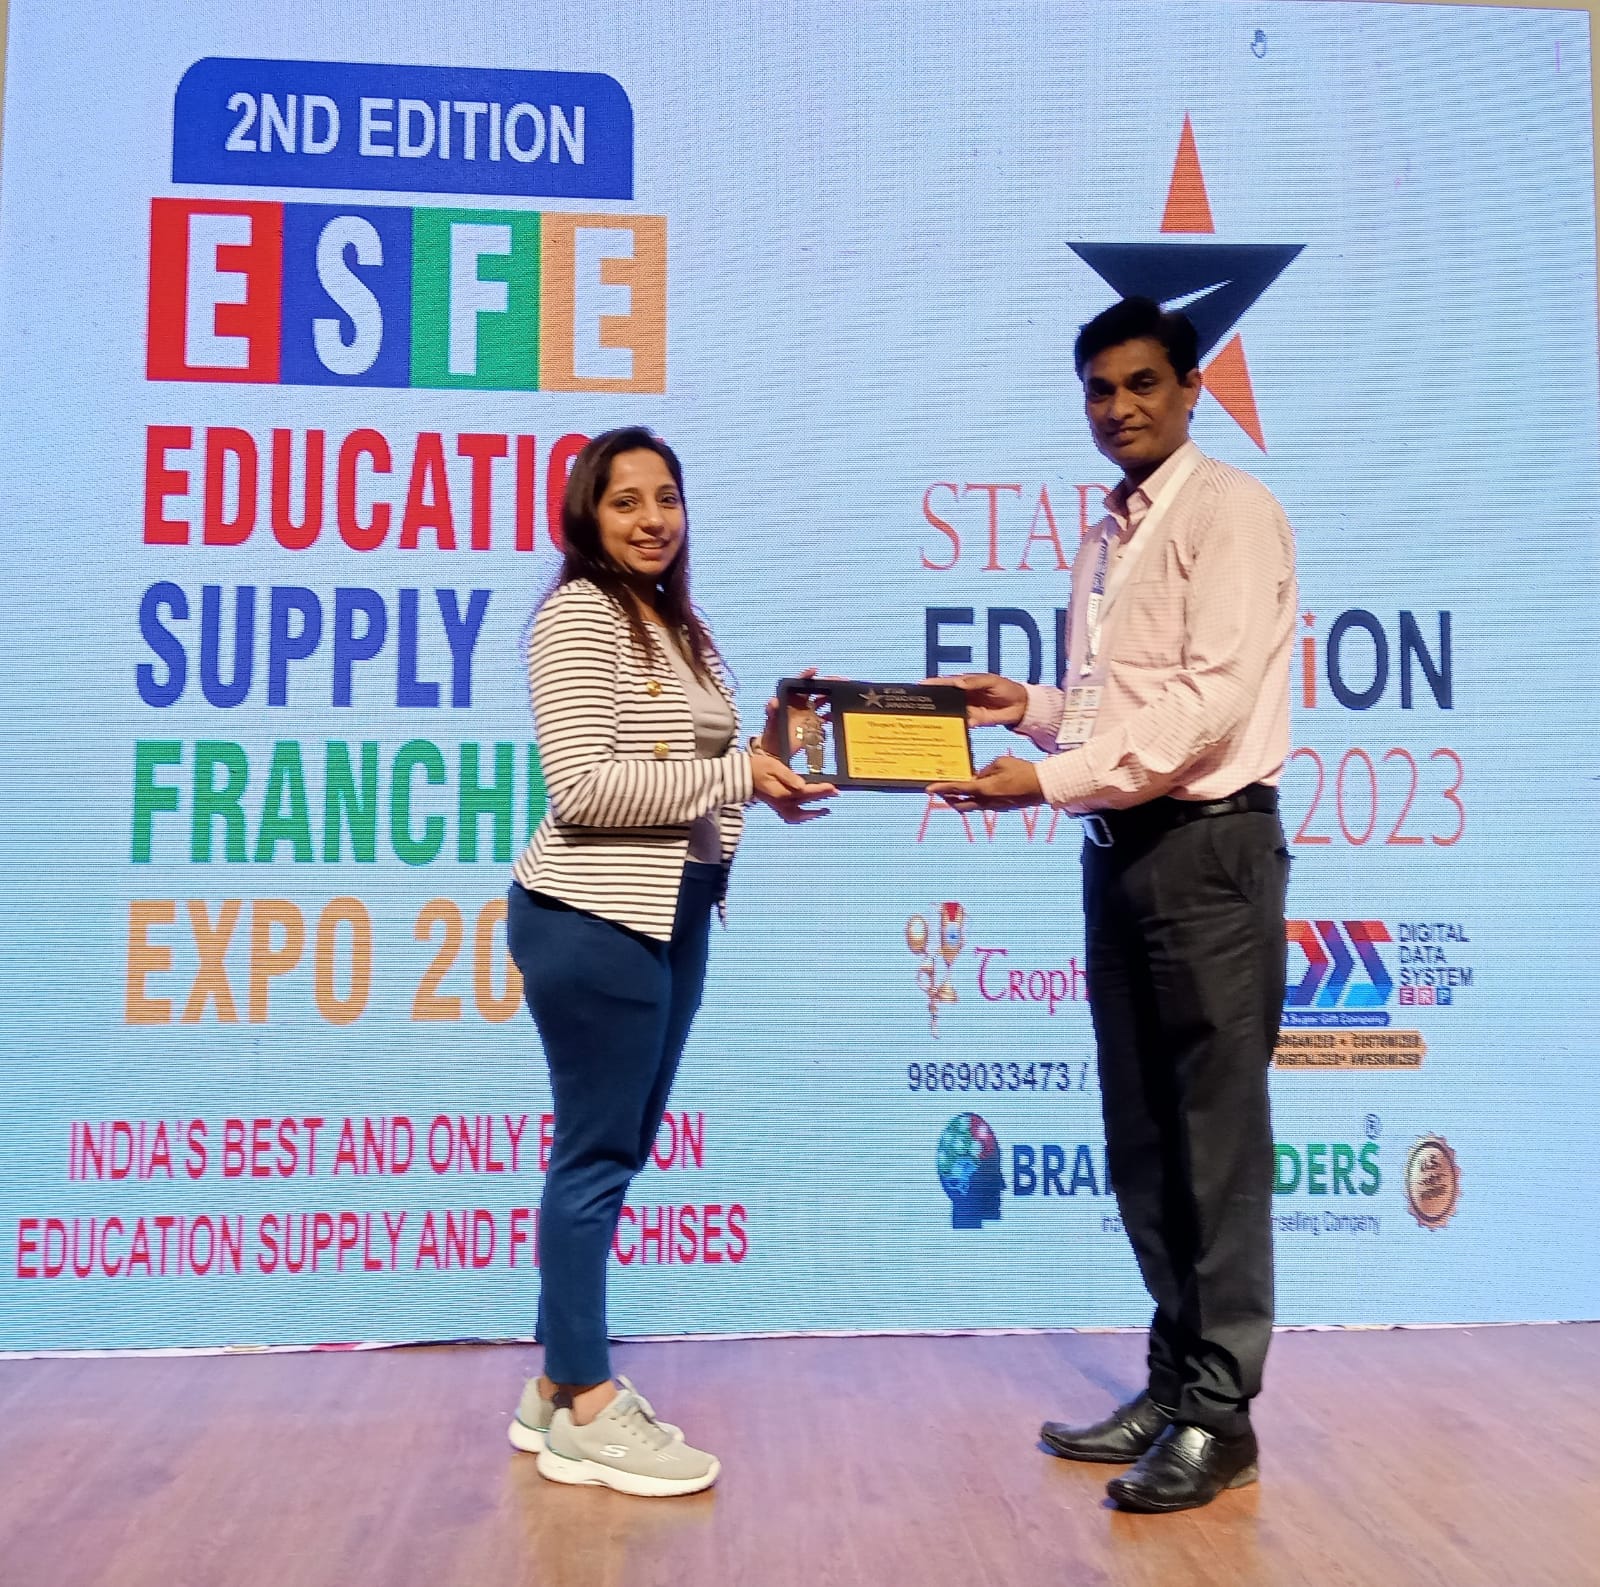 Excellence institute Award at Star Education Award 2023